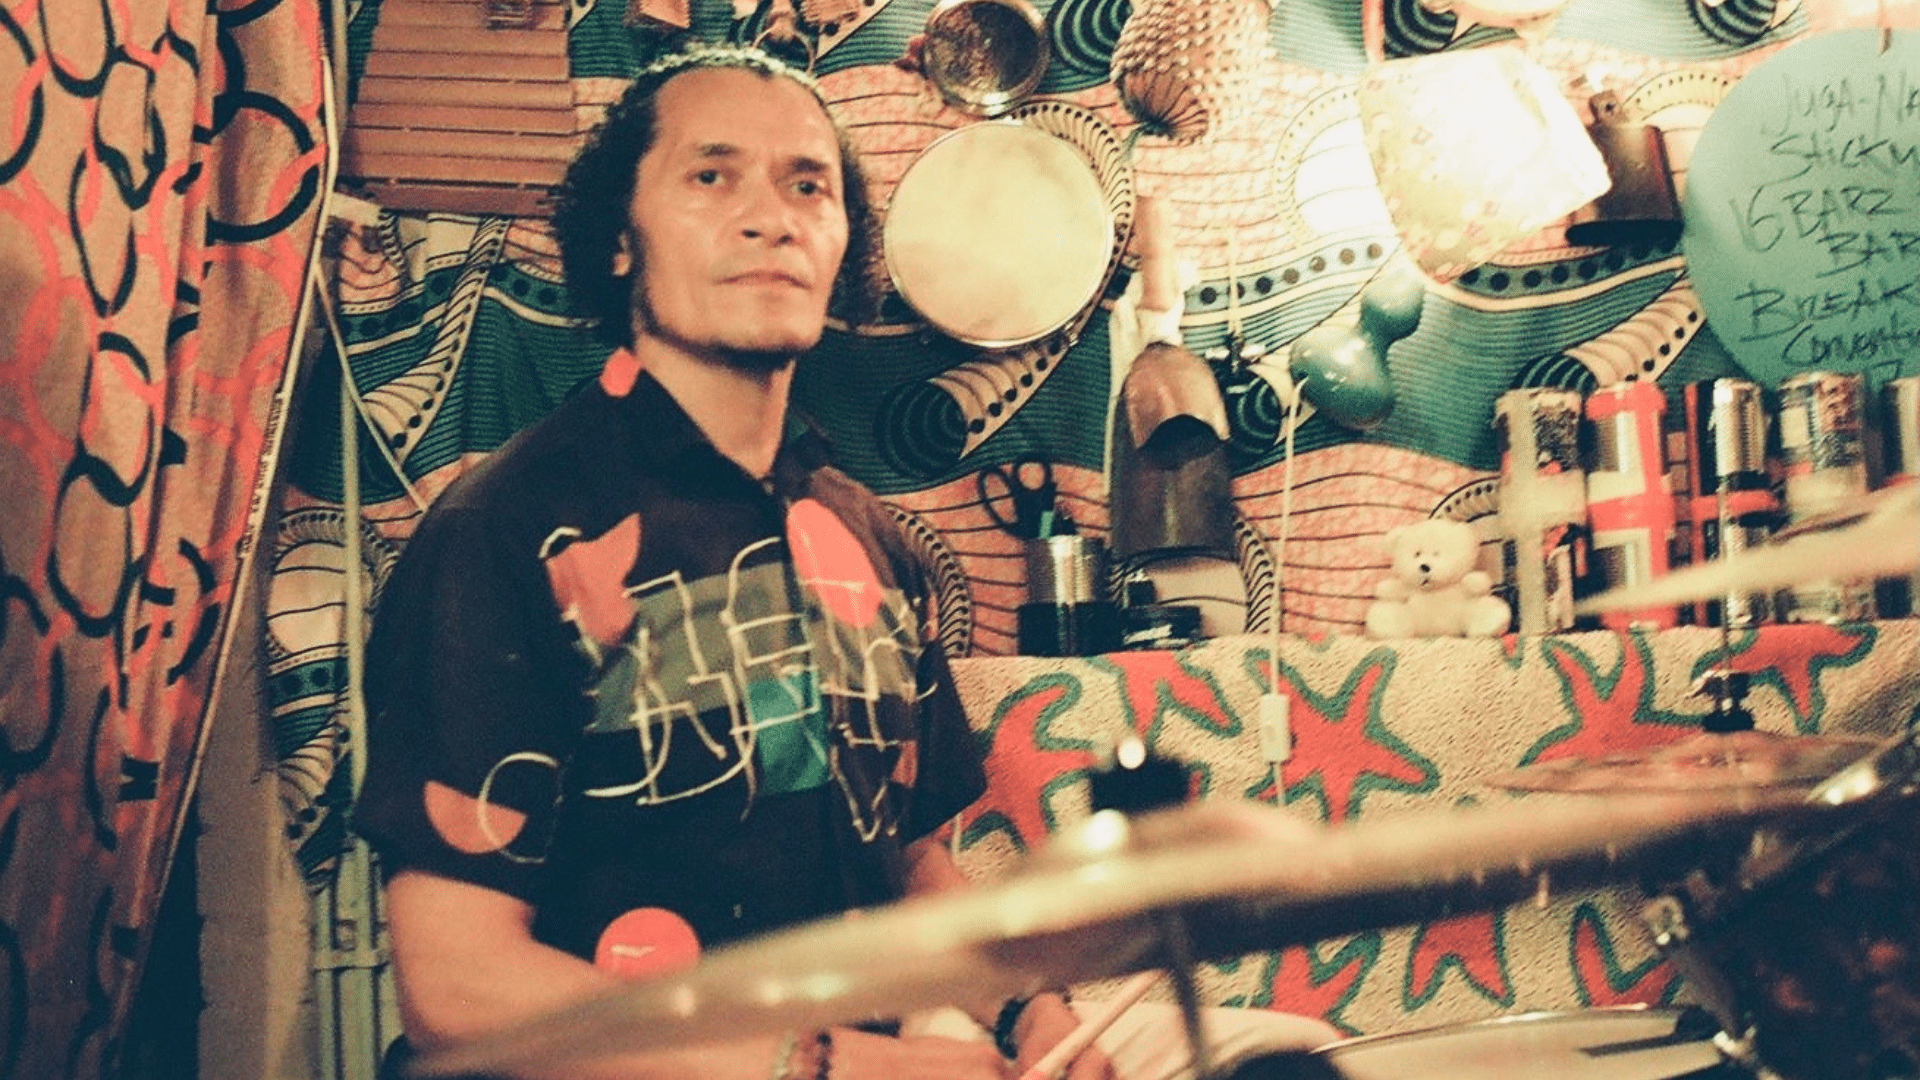 Photo of David Stickman Higgins in his studio. He's a Carribean man with mid-long curly hair. On the wall are many colourful and patterned fabrics and a variety of percussion instruments.